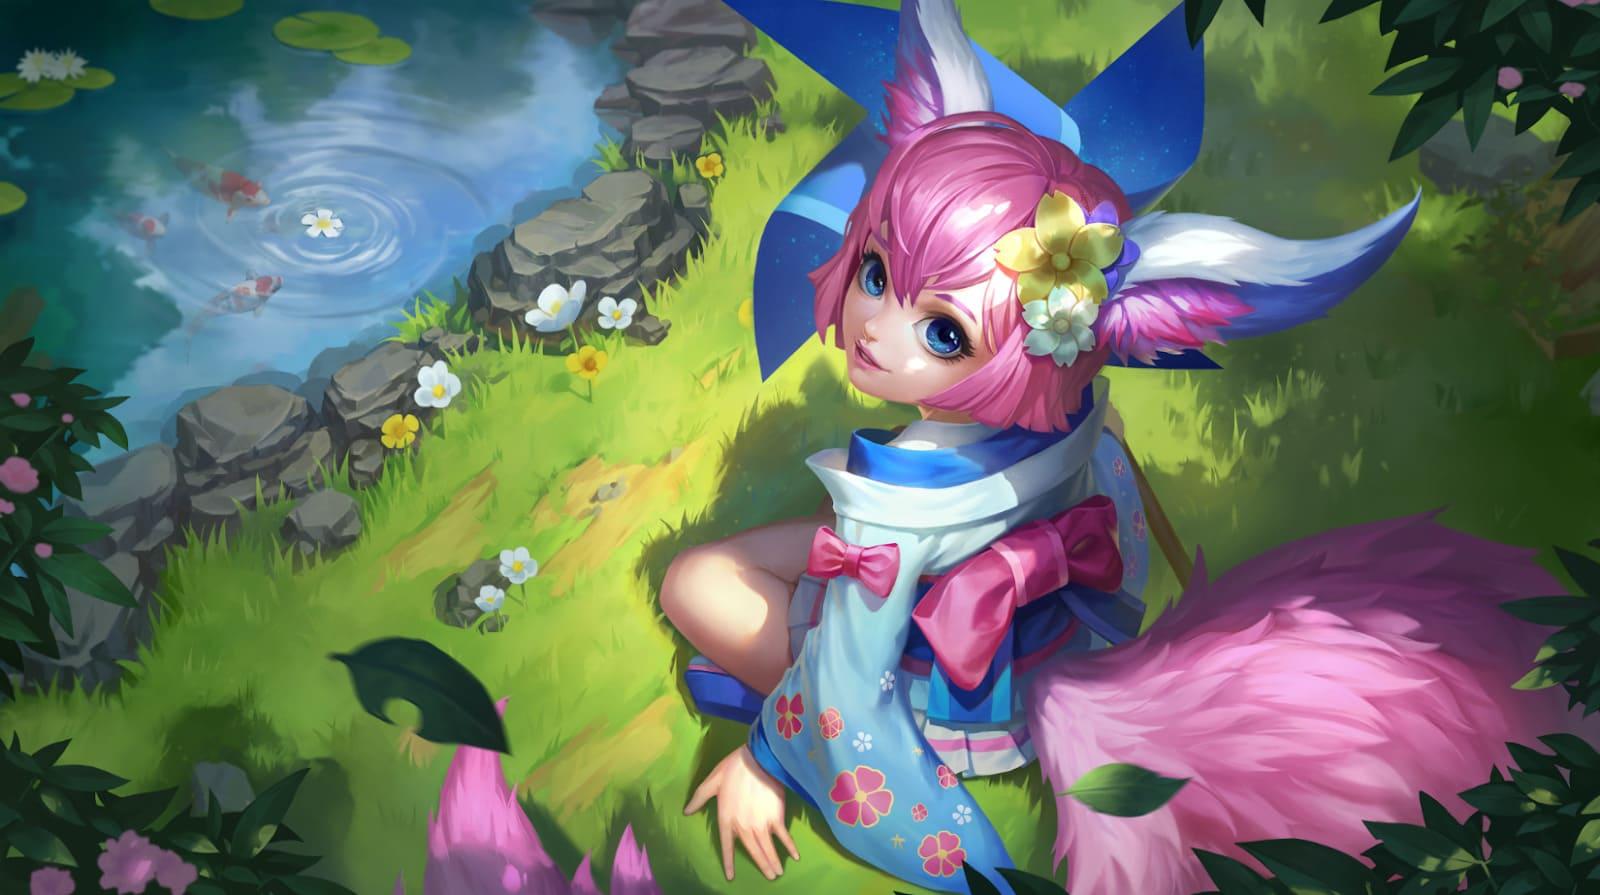 1600 x 895 · jpeg - 10+ Wallpaper Nana Mobile Legends (ML) Full HD for PC, Android & iOS